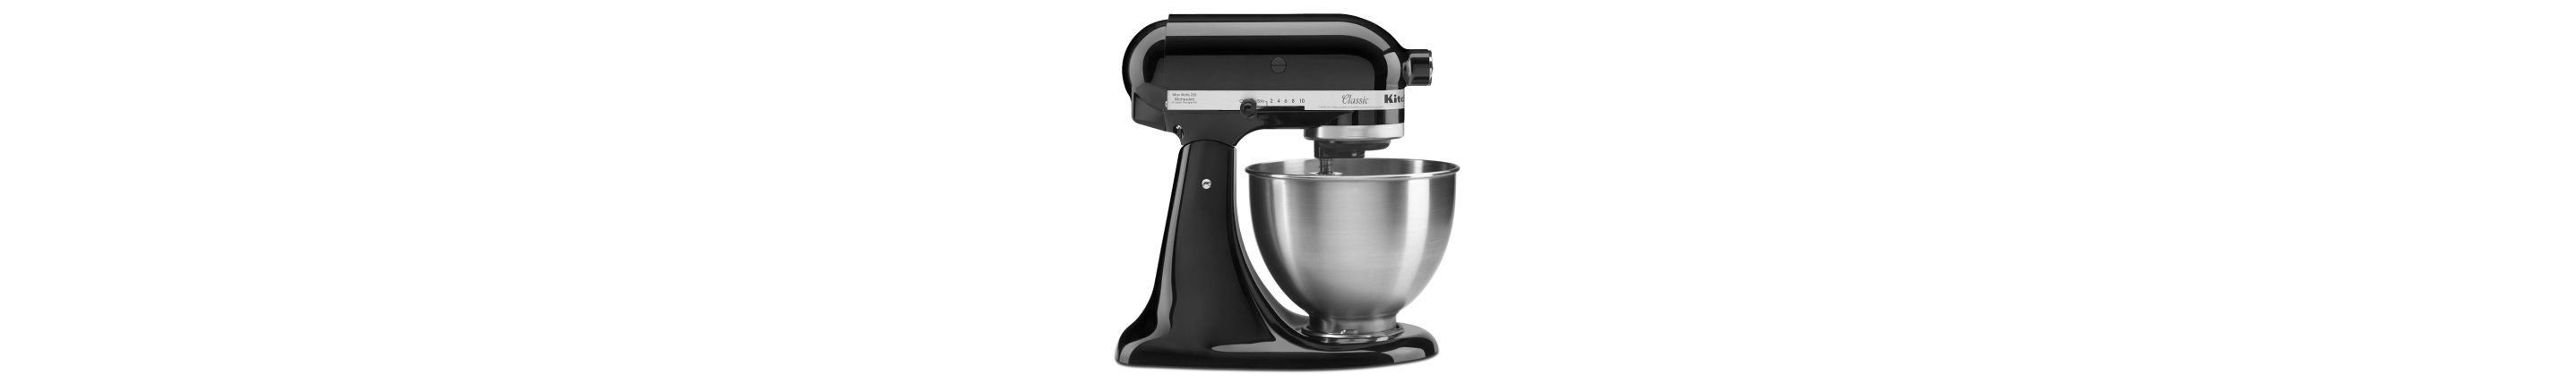 Side profile of black stand mixer